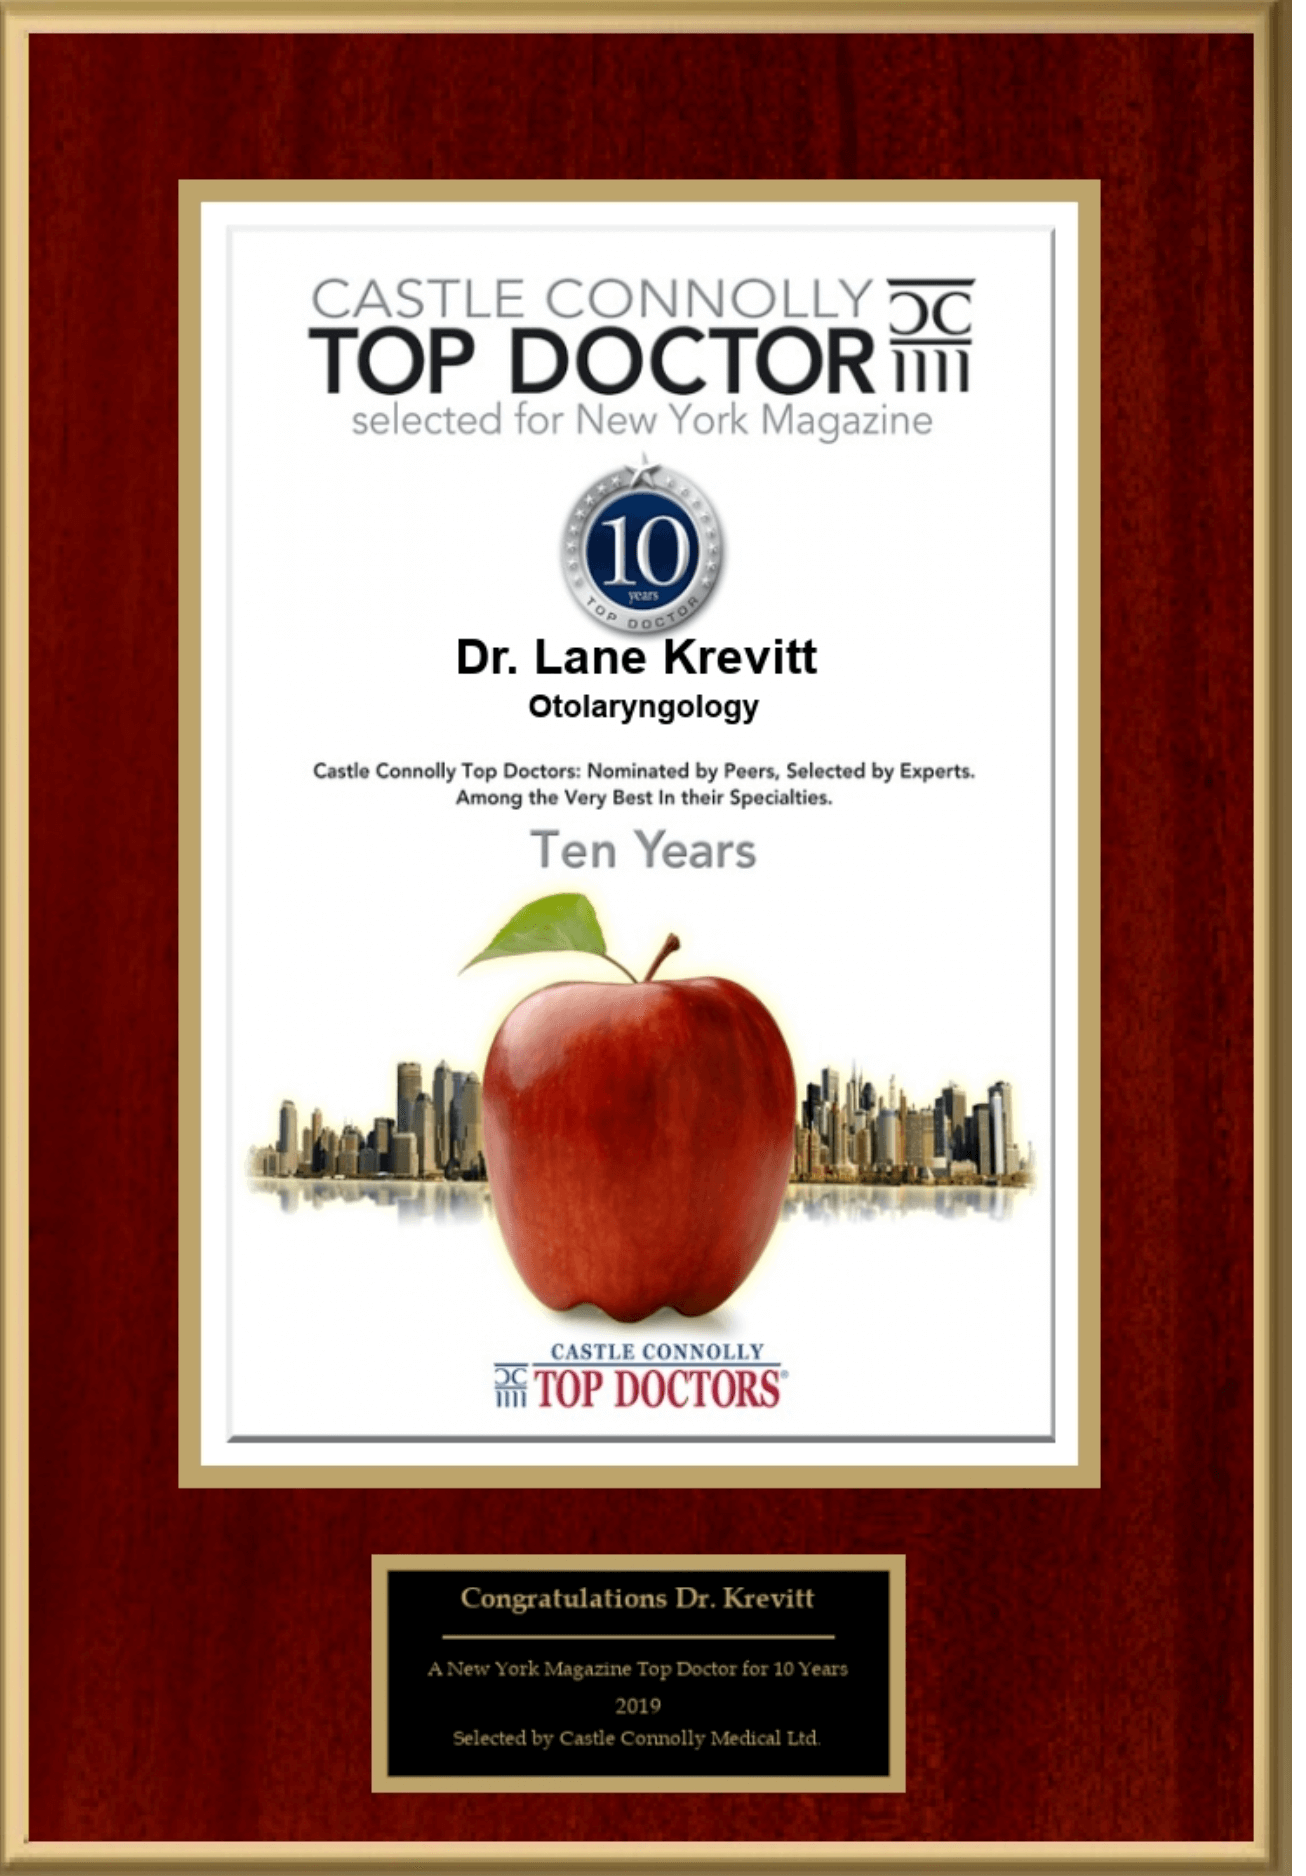 10 Years of Being Castle Connolly Top Doctor